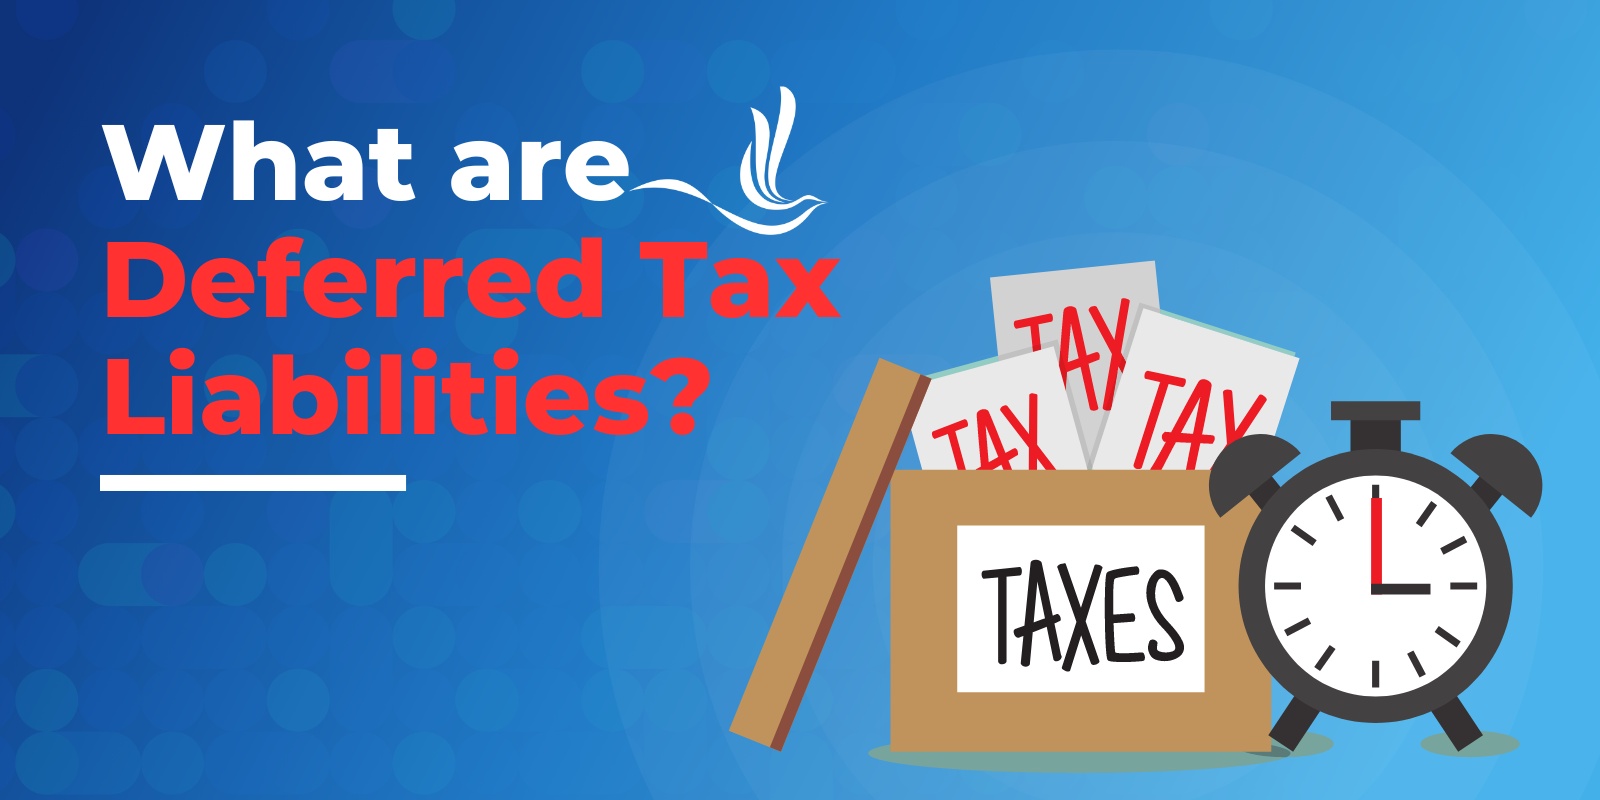 what are deferred tax liabilities